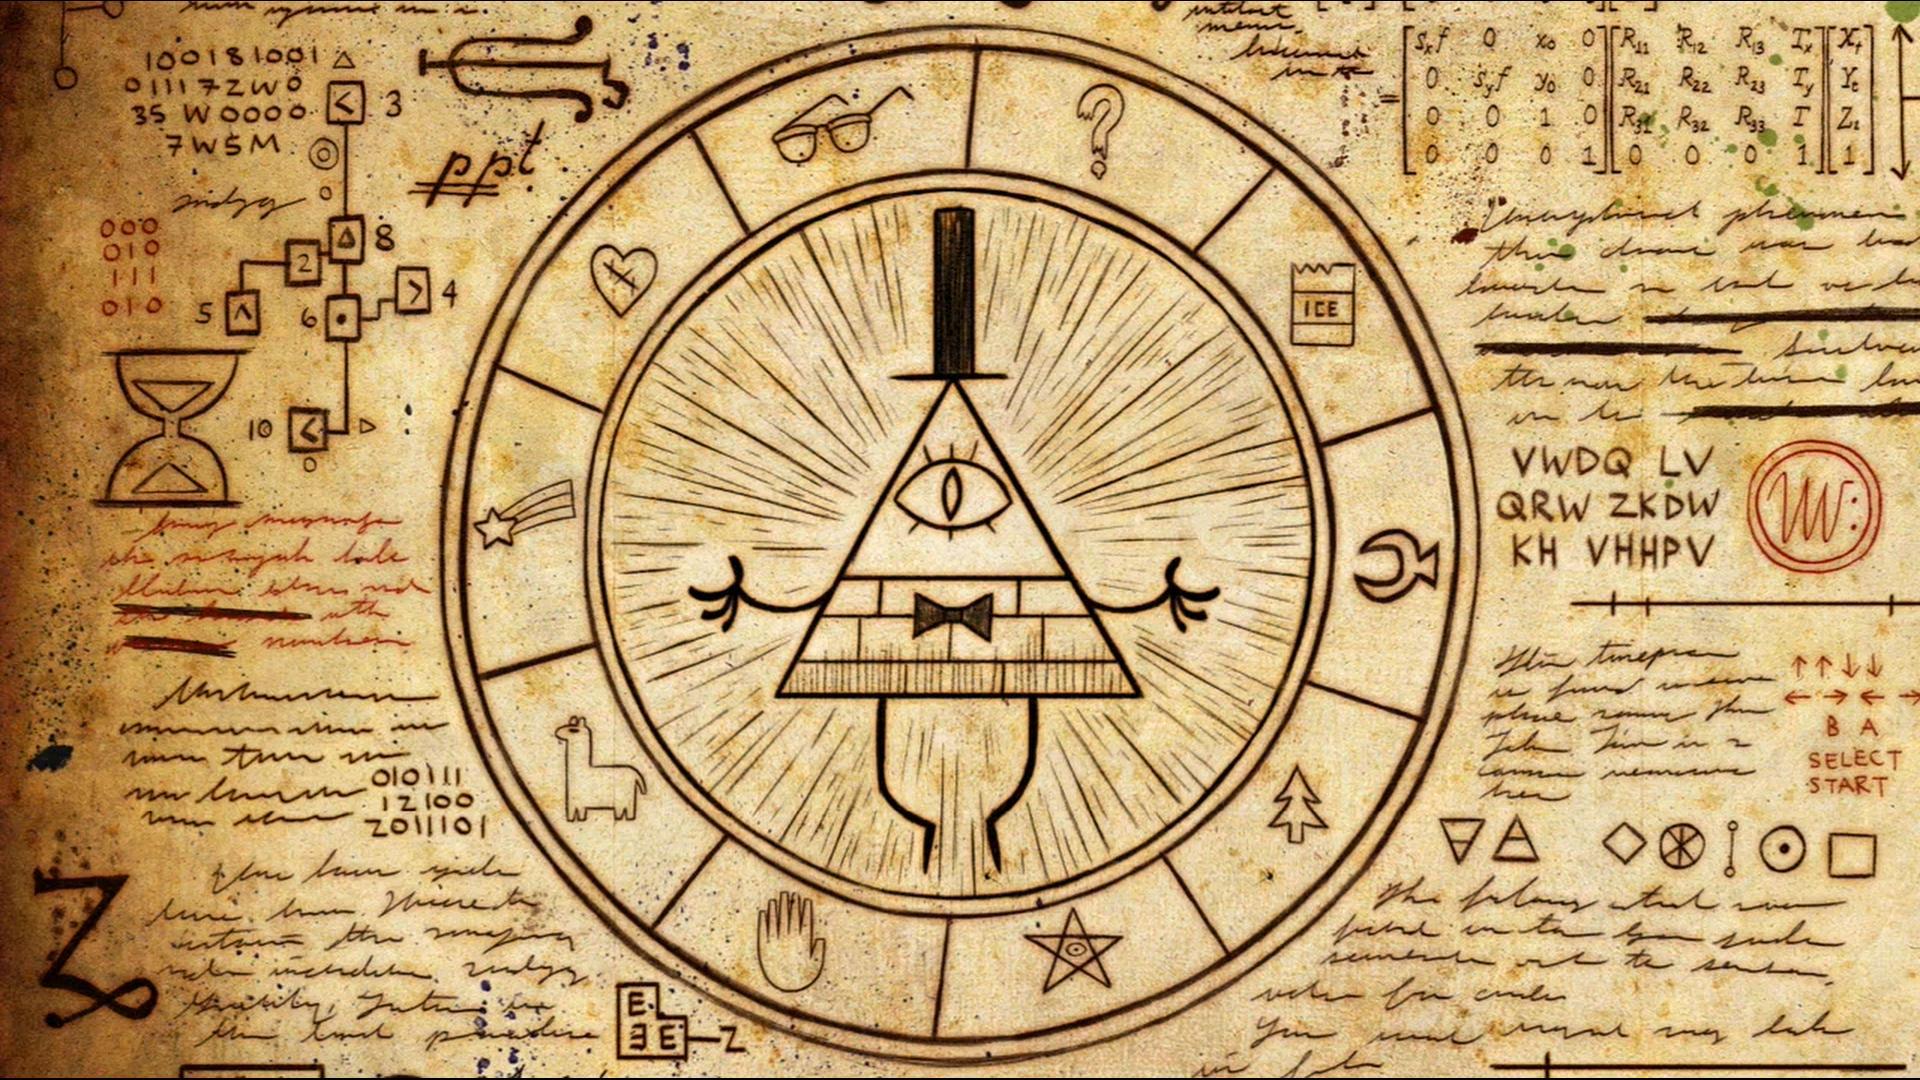 Gravity Falls Hd Wallpapers And Backgrounds - Gravity Falls - HD Wallpaper 